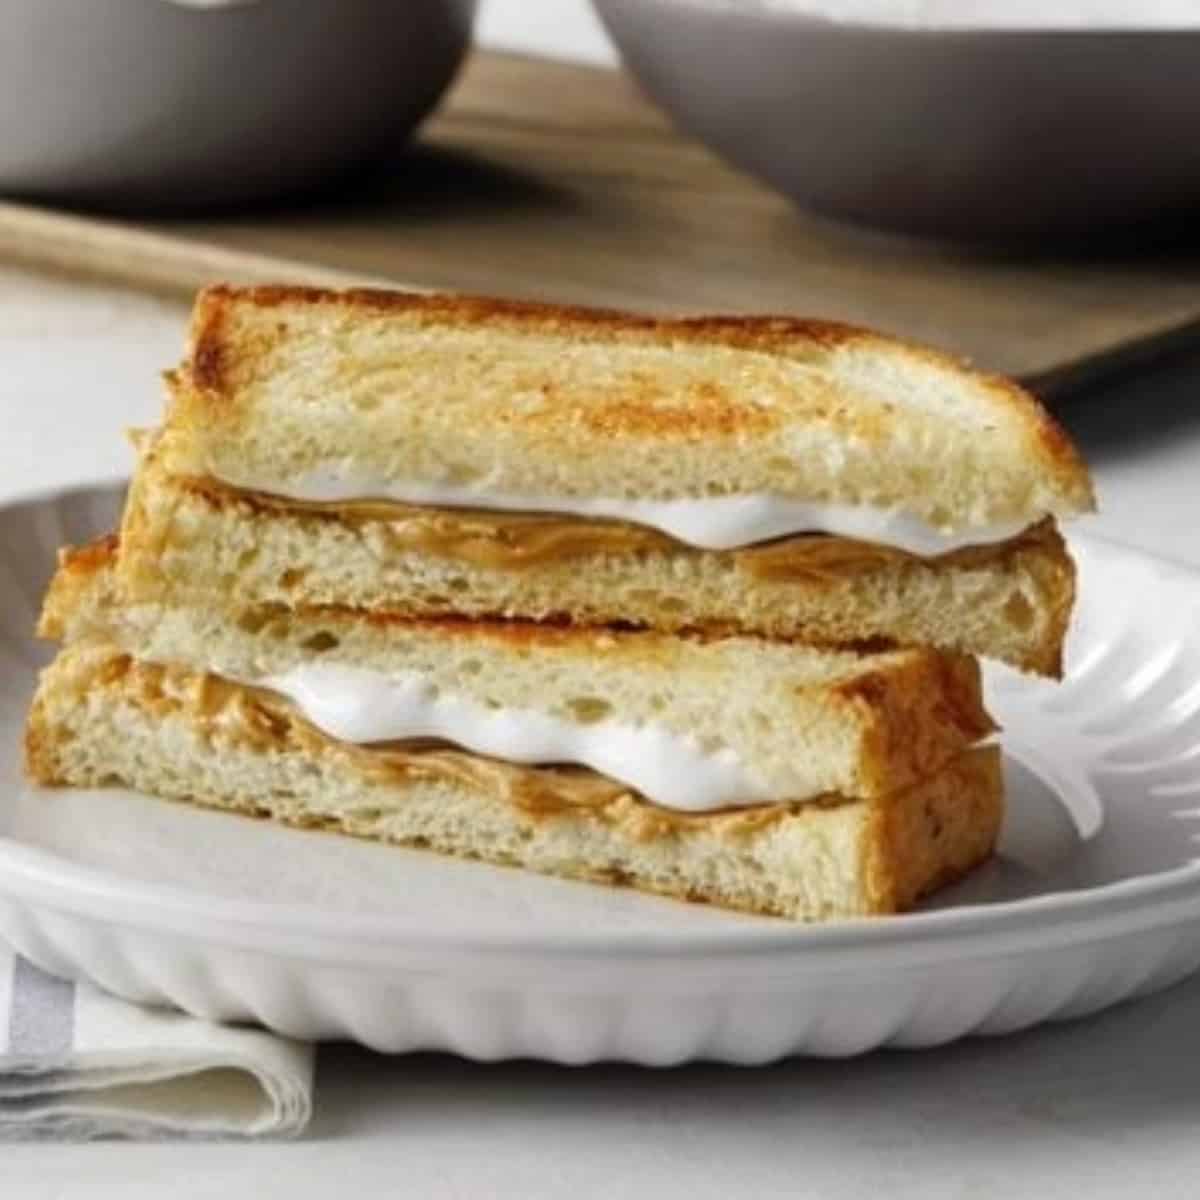 Grilled peanut butter and marshmallow sandwich.